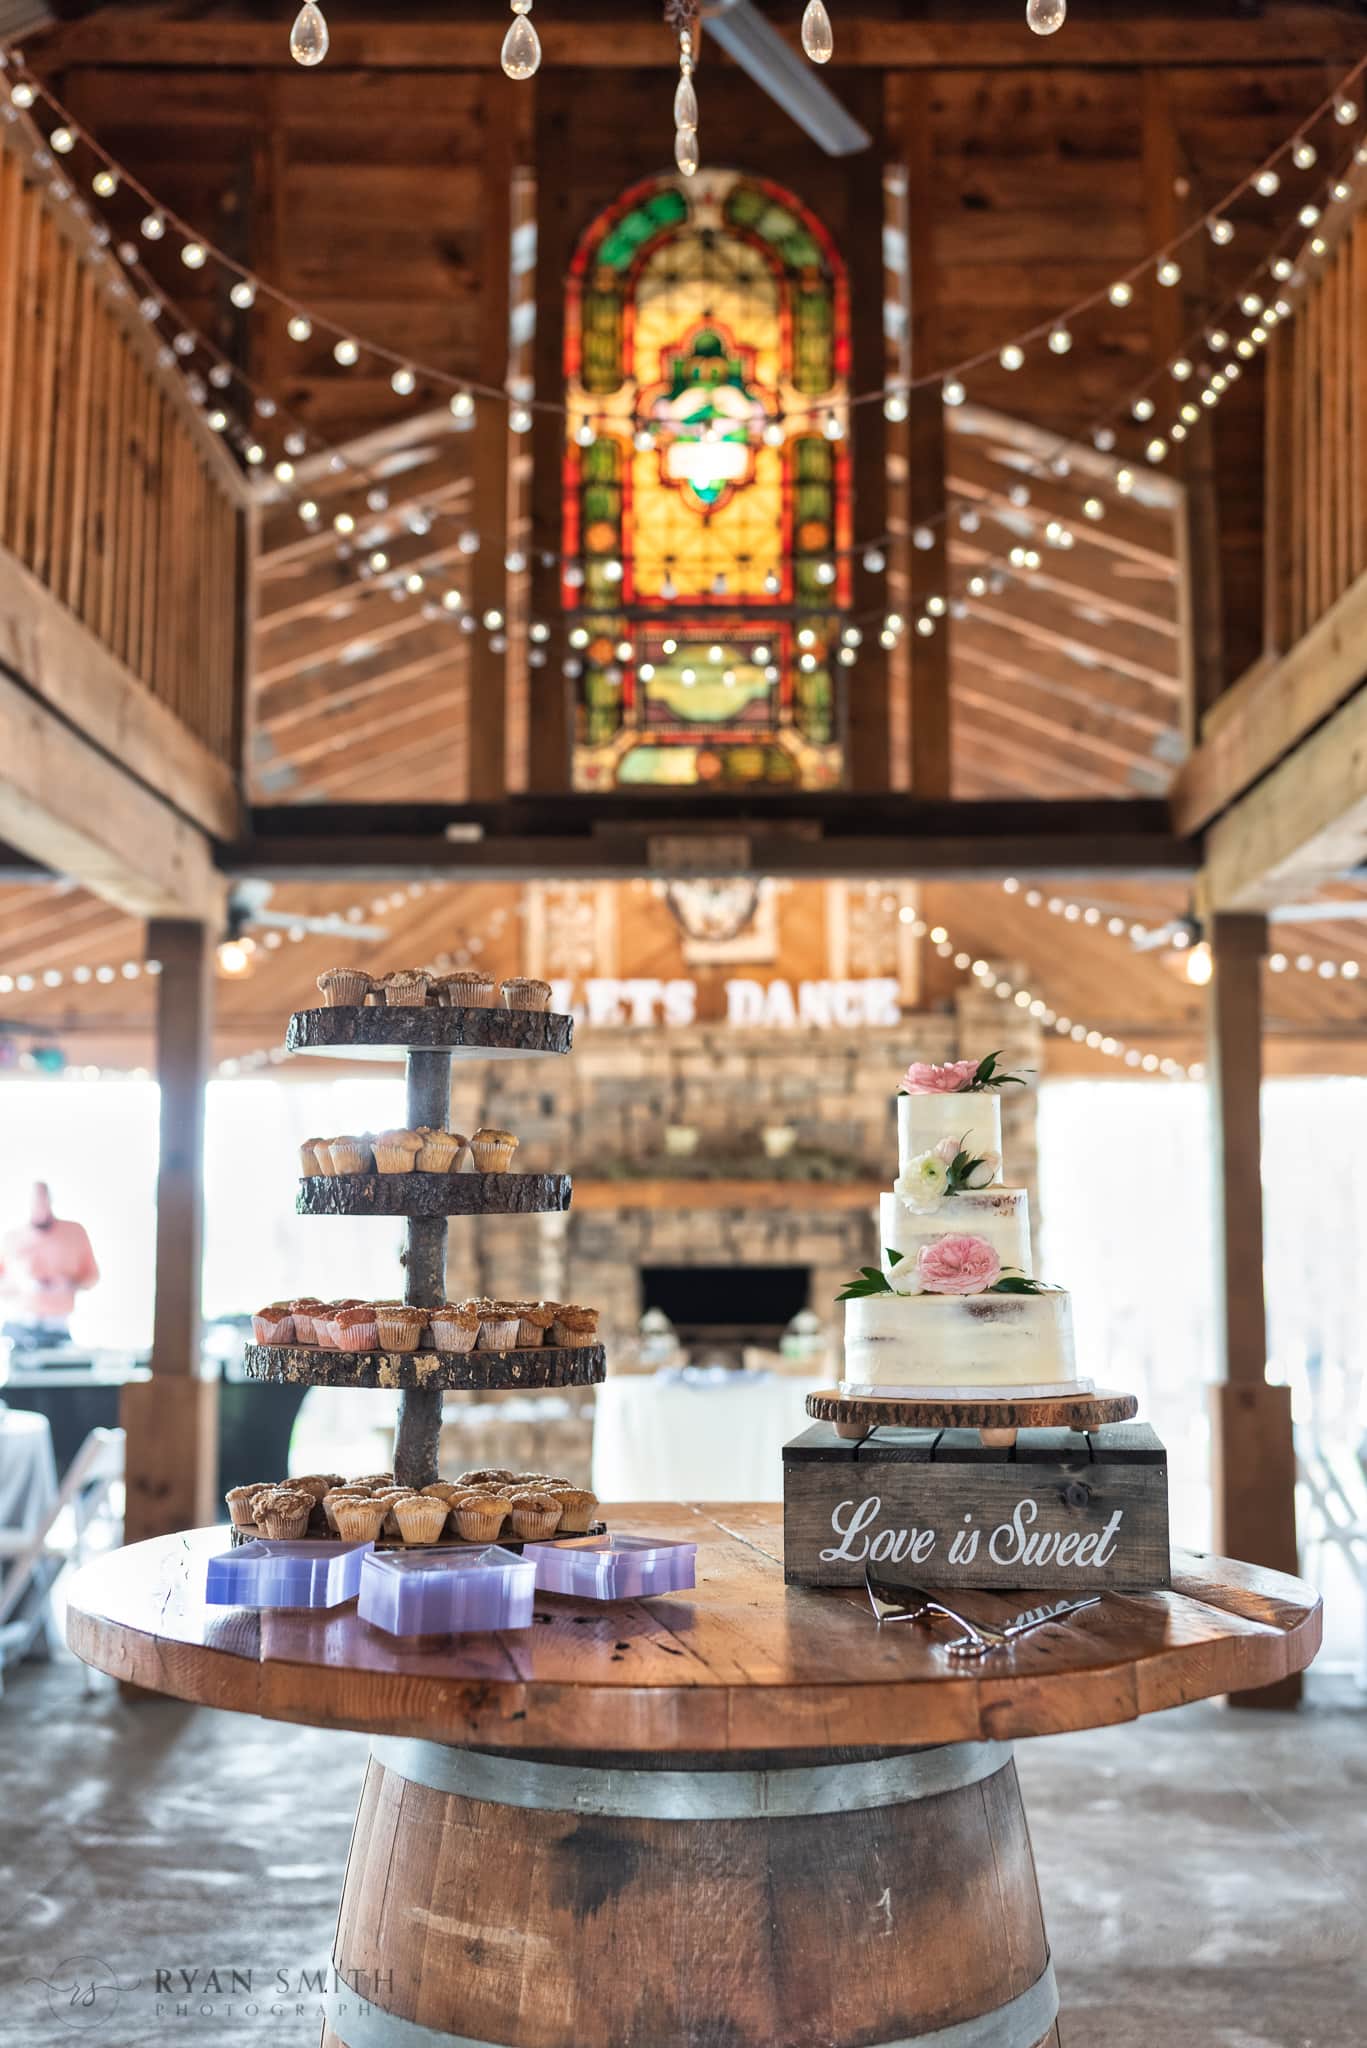 Detail picture of the cake table with stained glass window in the background - Wildhorse at Parker Farms